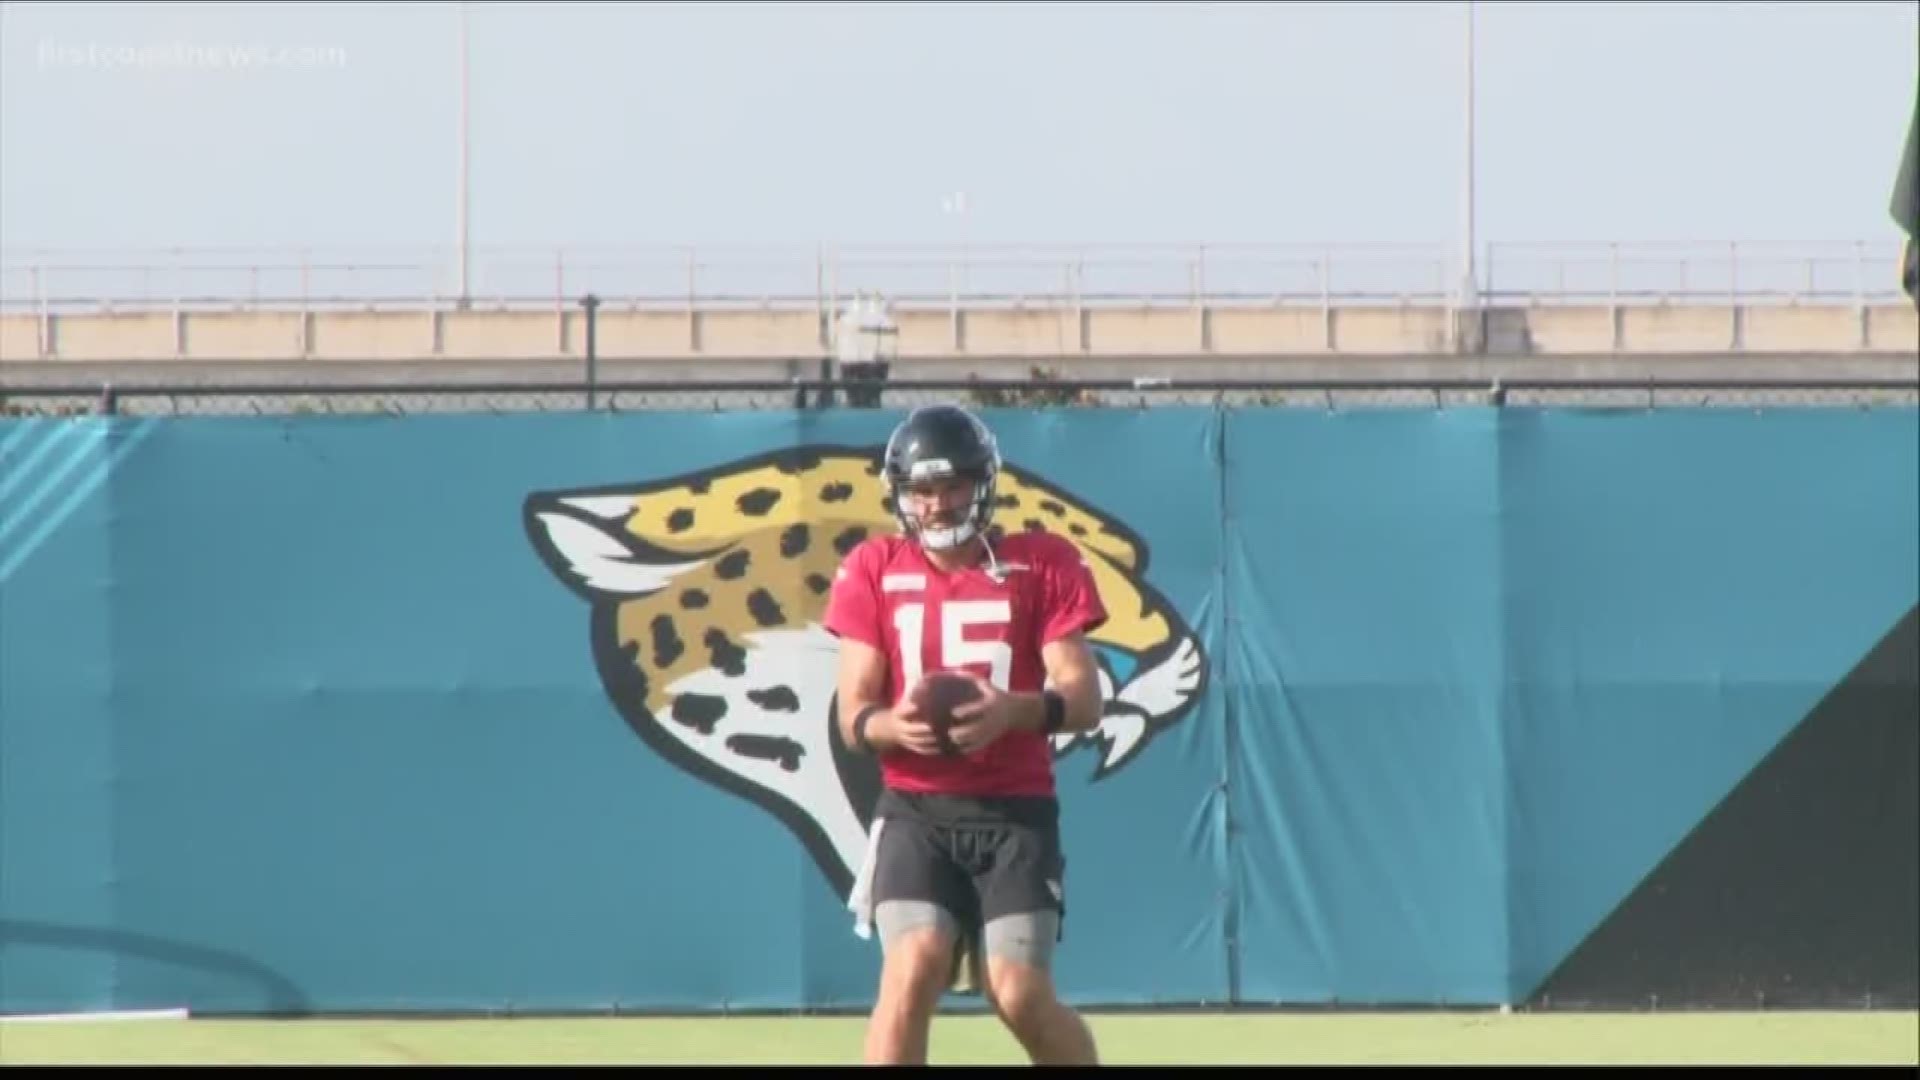 The Jaguars' rookie quarterback struggled in his first preseason game, but is ready to get right back on the field Thursday against the Eagles.